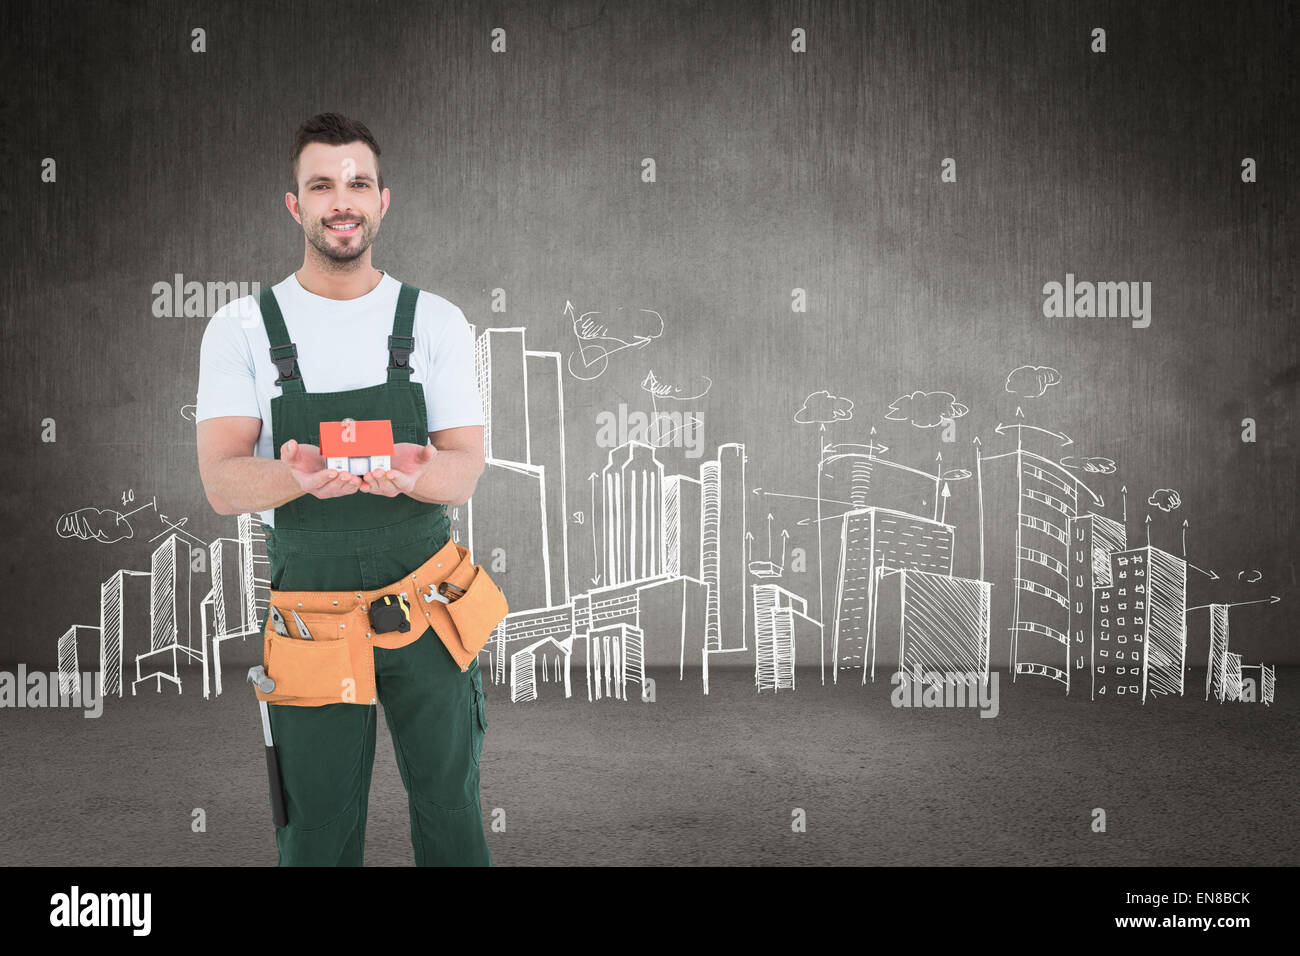 Composite image of happy construction worker holding house model Stock Photo